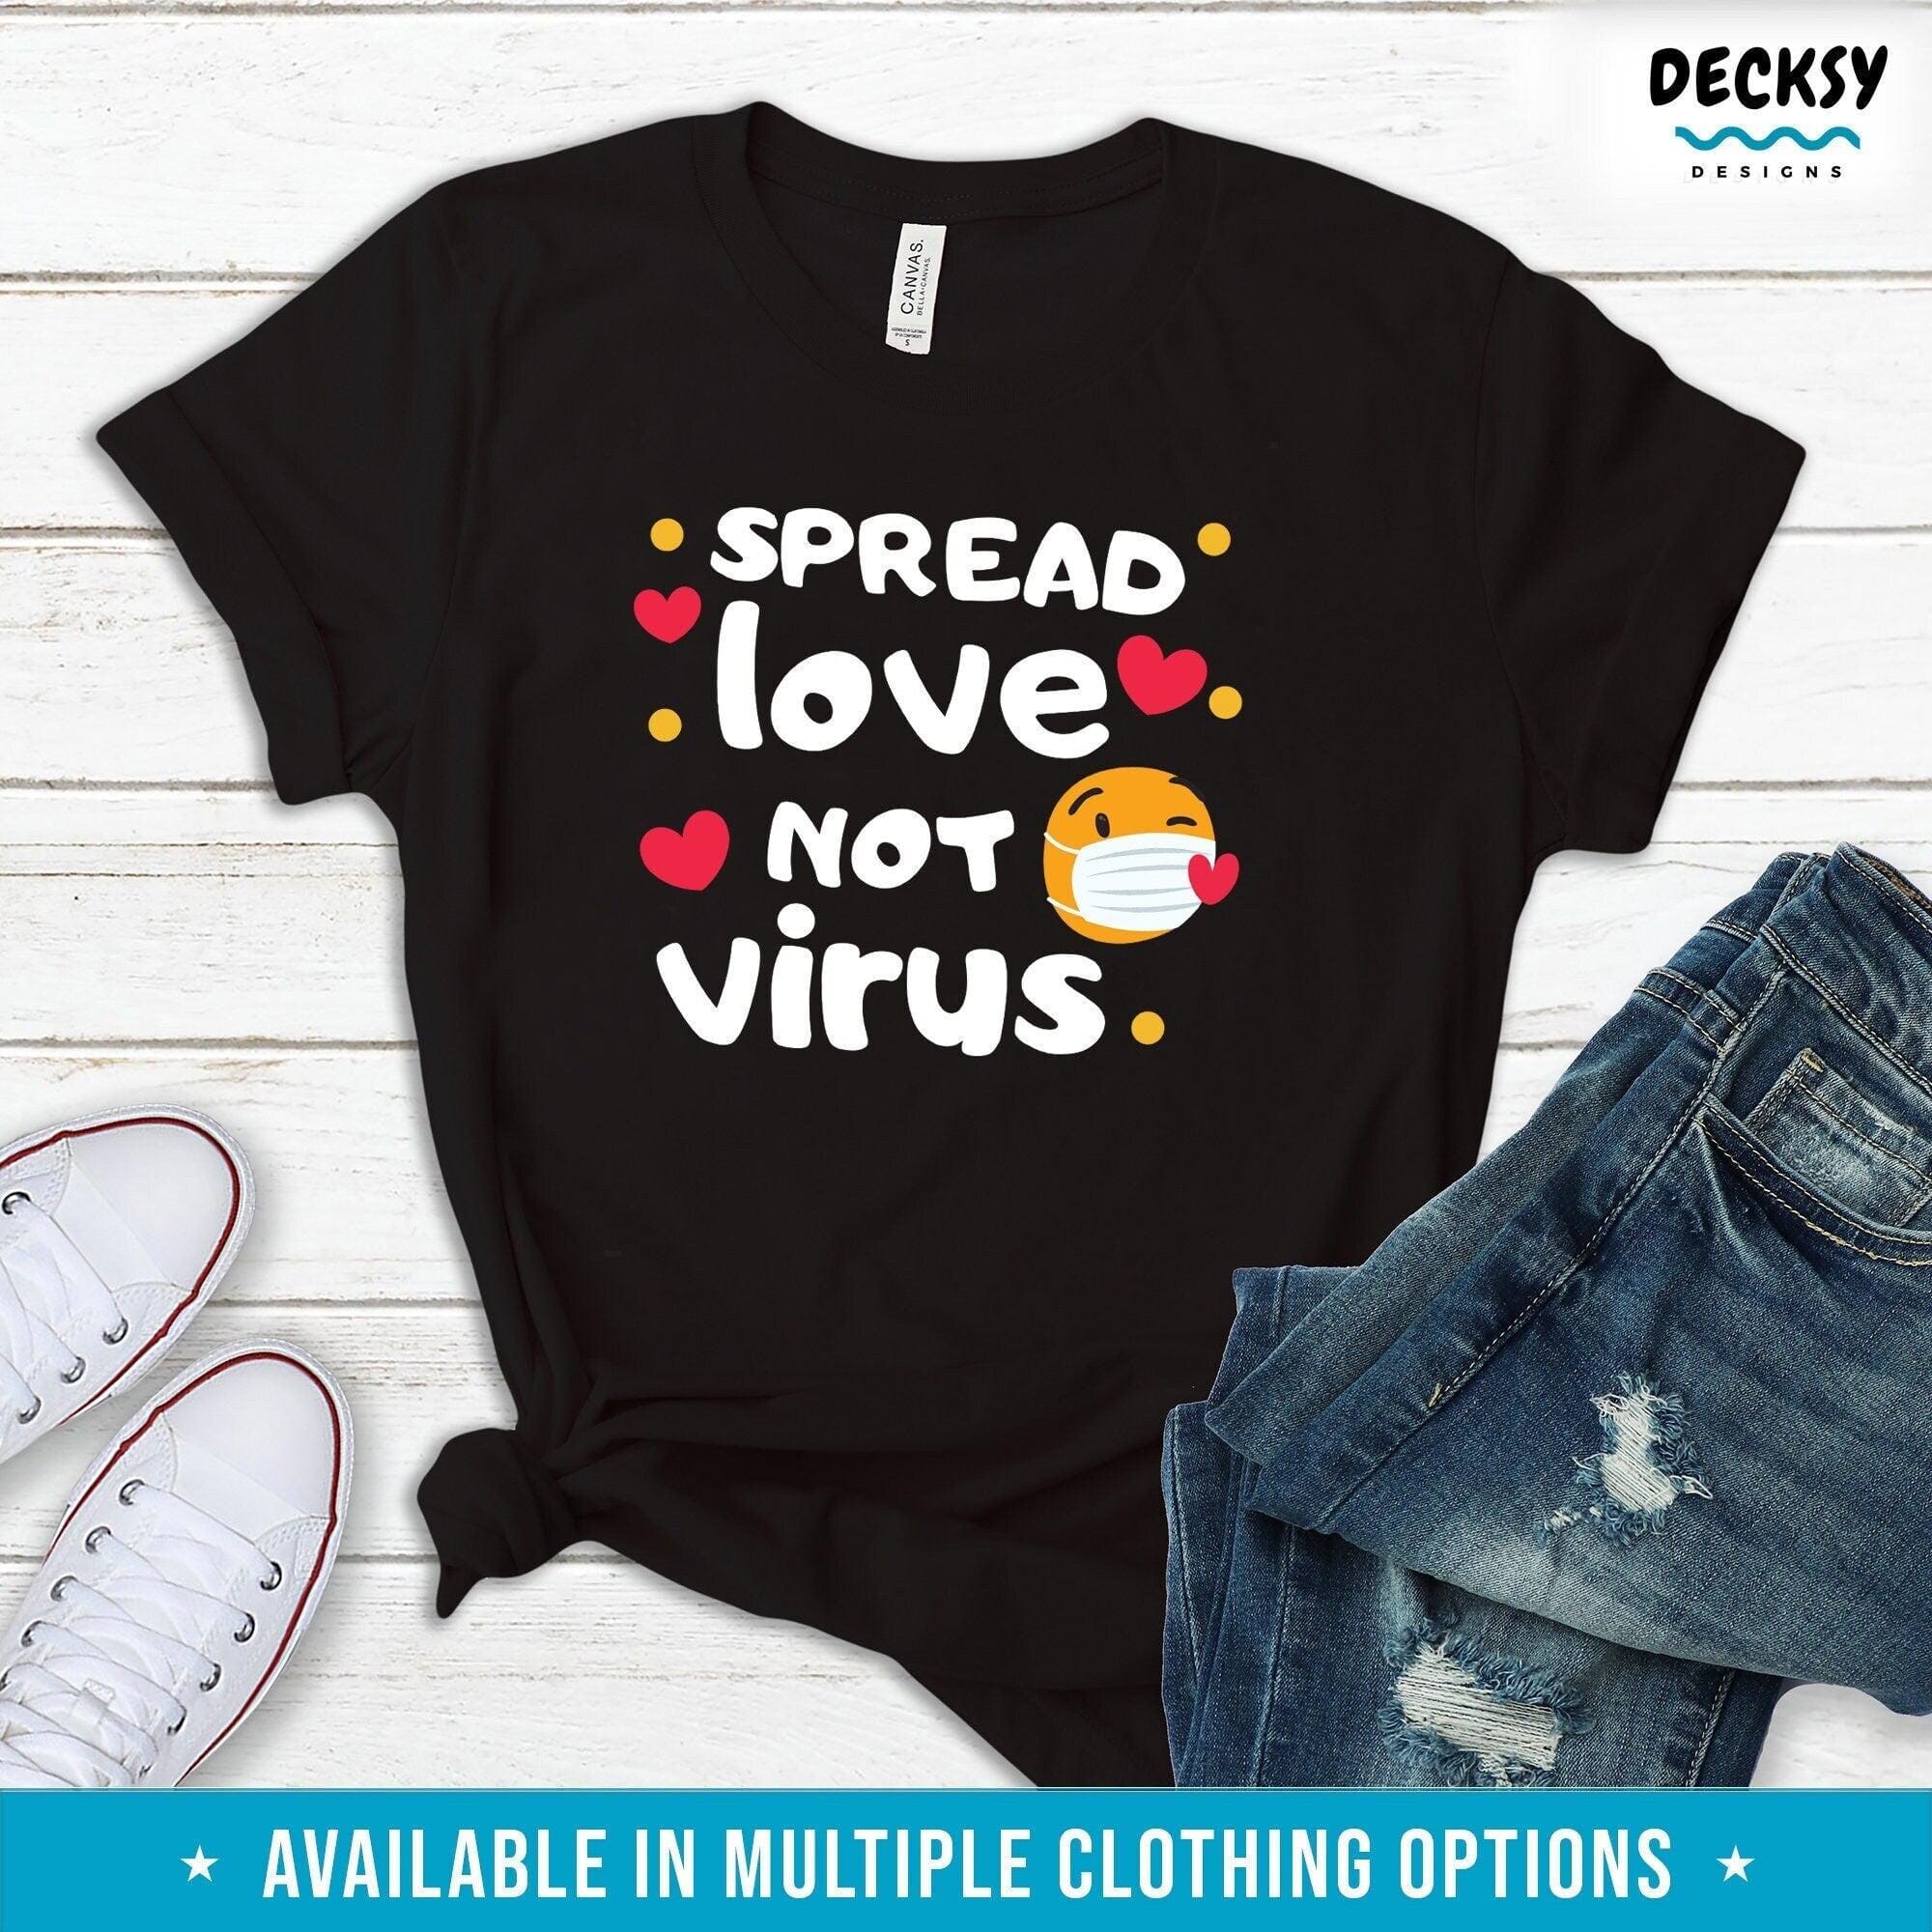 Spread Love Not Virus Shirt, Funny Valentine Gift-Clothing:Gender-Neutral Adult Clothing:Tops & Tees:T-shirts:Graphic Tees-DecksyDesigns